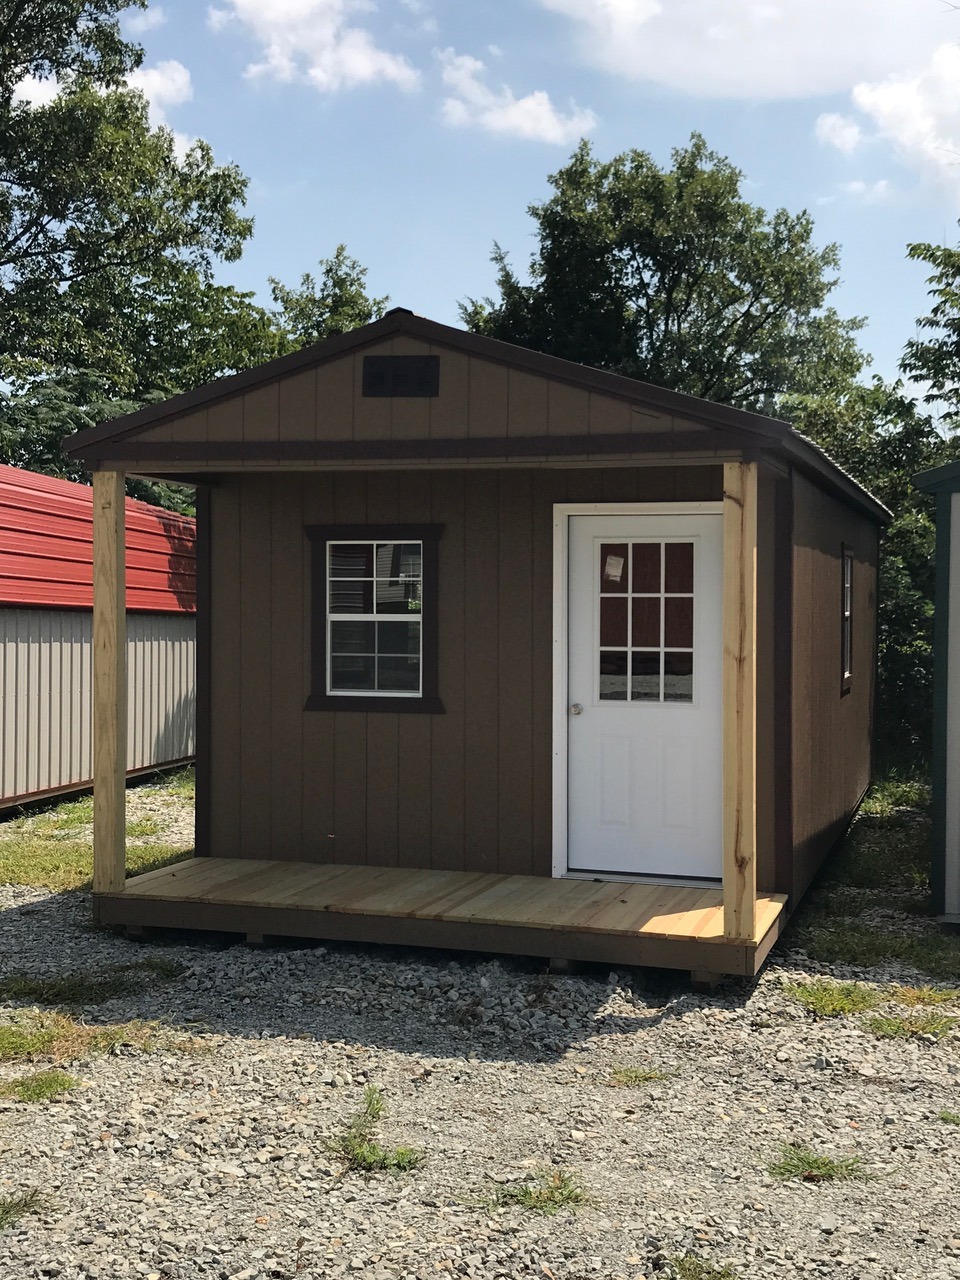 Brown painted express series cabin with black trim